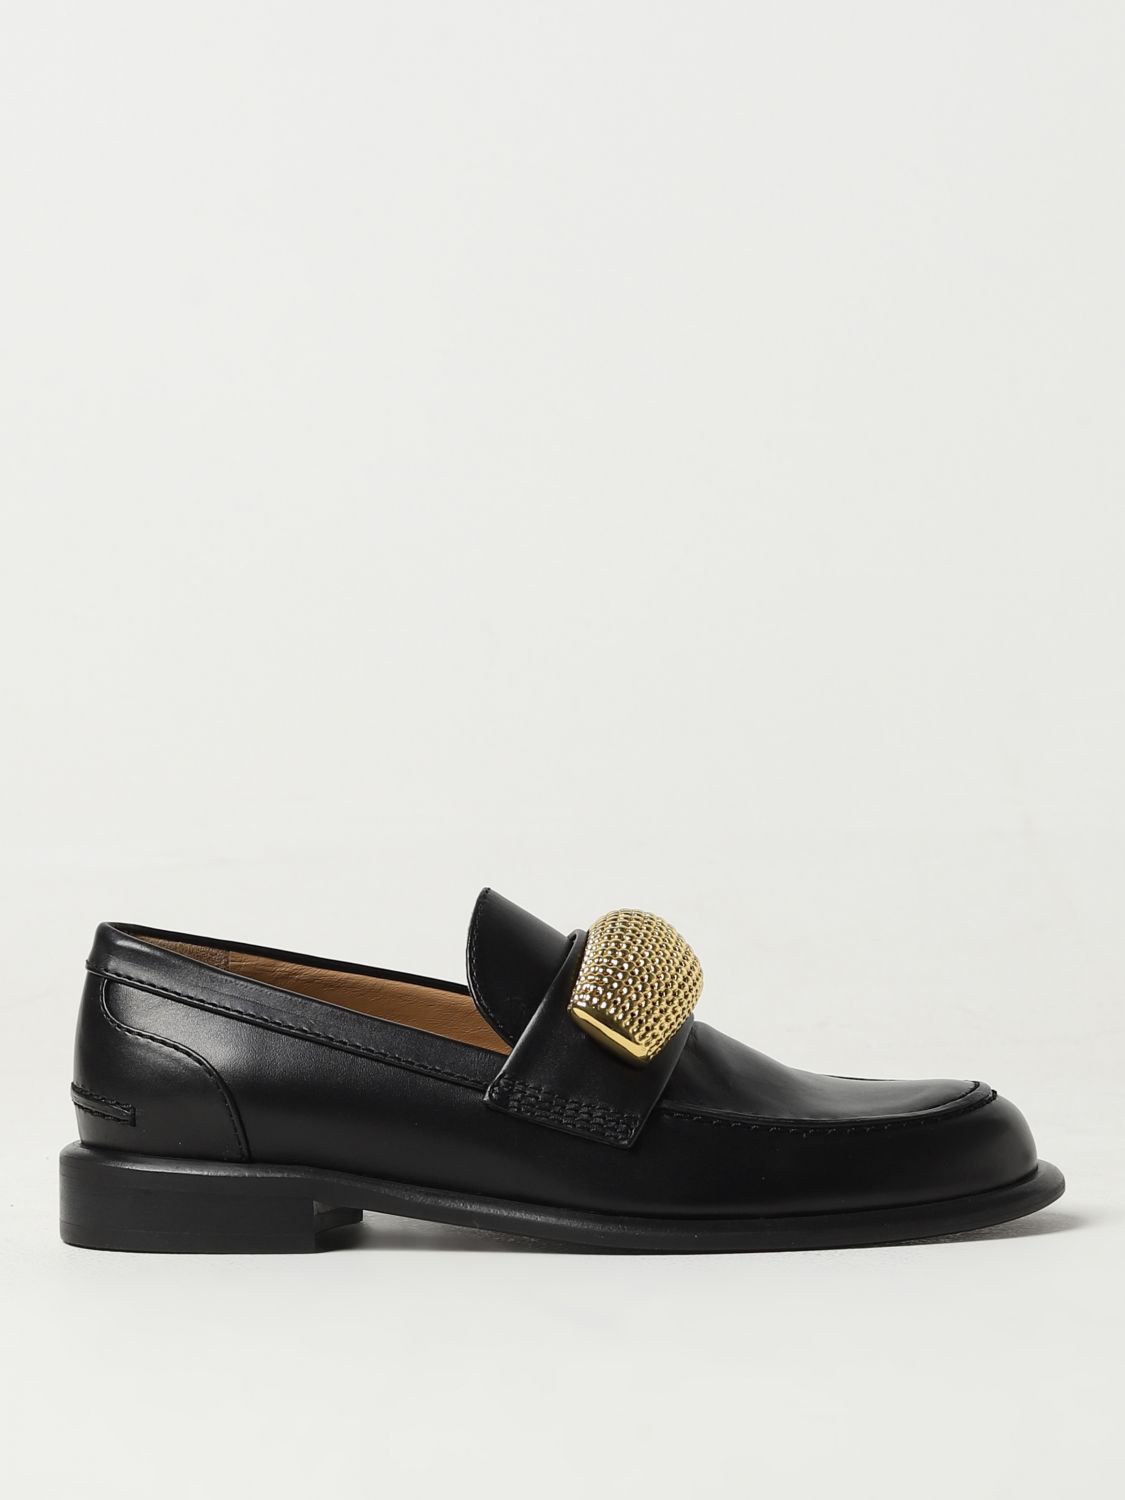 JW ANDERSON LOAFERS JW ANDERSON WOMAN COLOR BLACK,F36974002